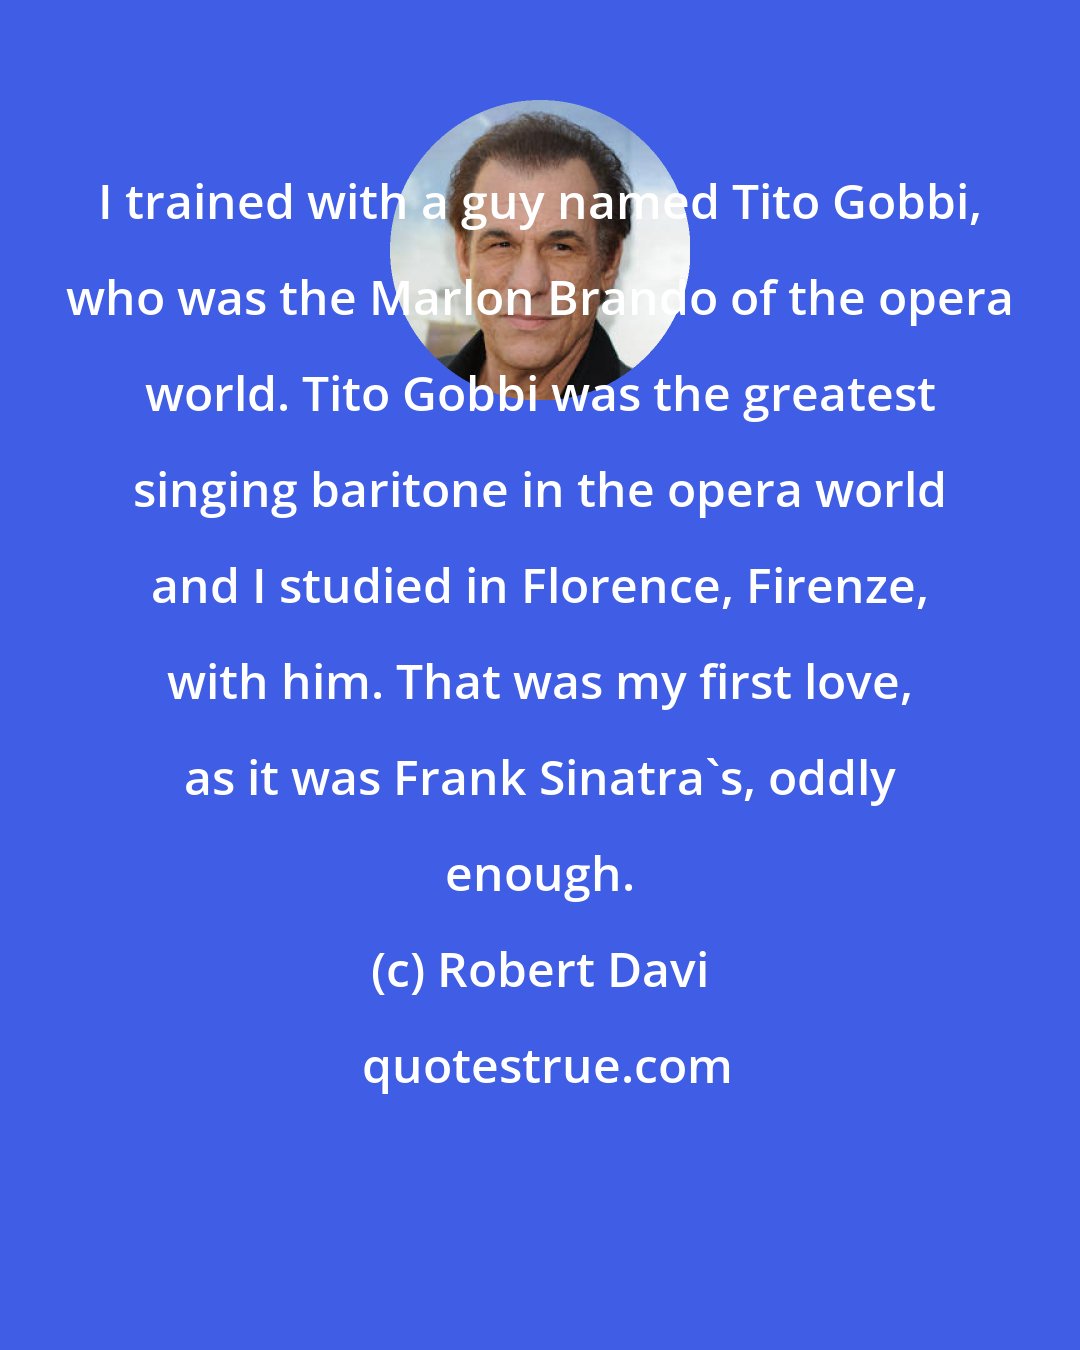 Robert Davi: I trained with a guy named Tito Gobbi, who was the Marlon Brando of the opera world. Tito Gobbi was the greatest singing baritone in the opera world and I studied in Florence, Firenze, with him. That was my first love, as it was Frank Sinatra's, oddly enough.